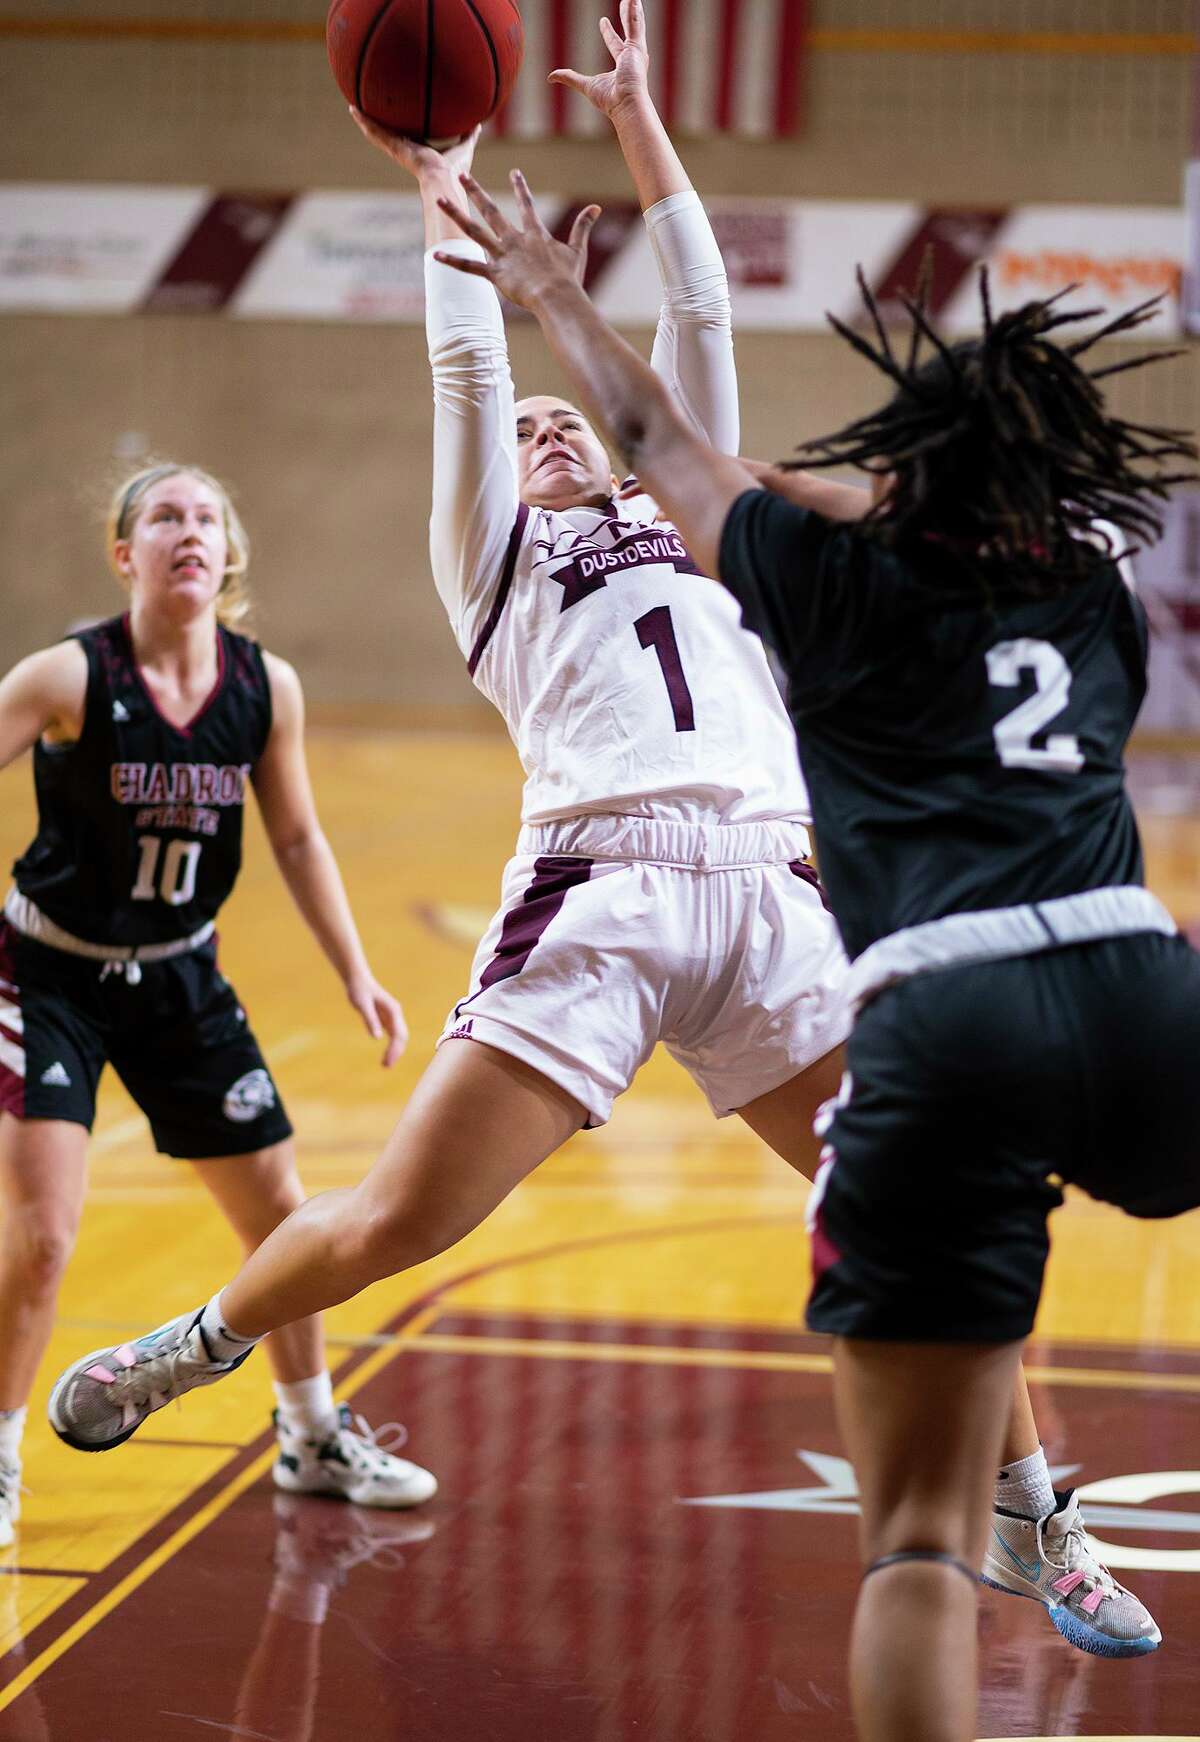 In this file photo, TAMIU’s Evelyn Quiroz takes a last second shot during a game against Chardon State University, Saturday, Nov. 13, 2021, at the TAMIU KCB.